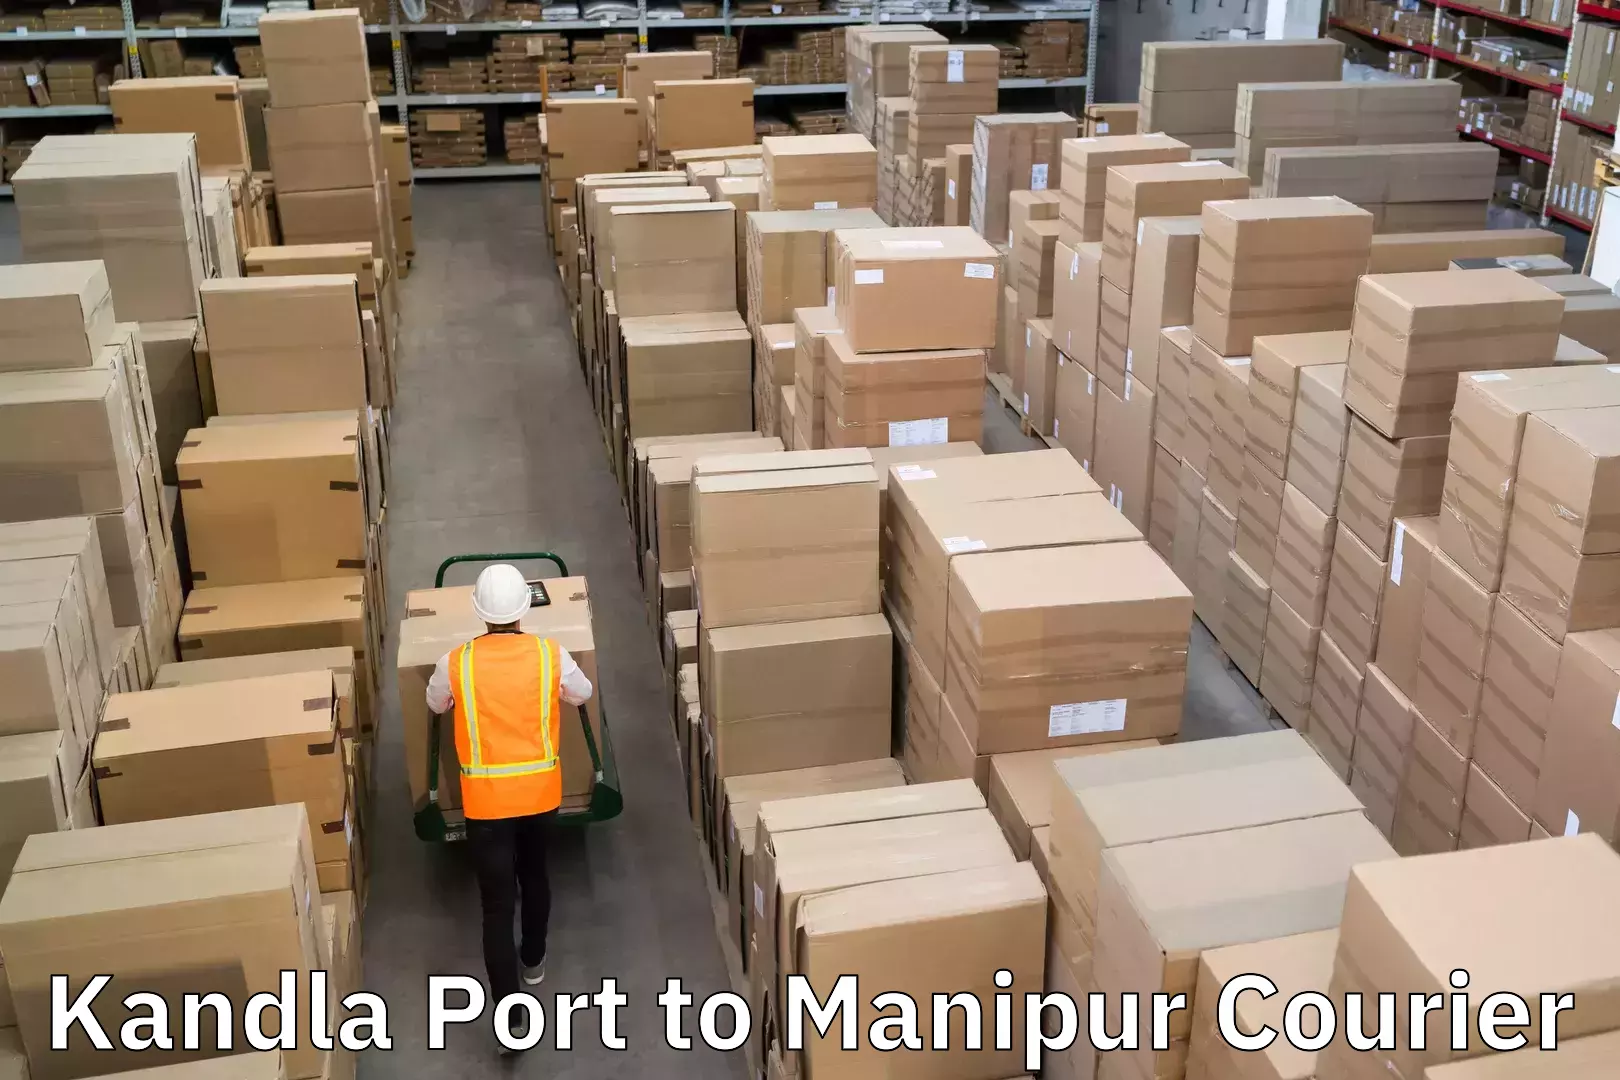 Express delivery solutions Kandla Port to Kanti